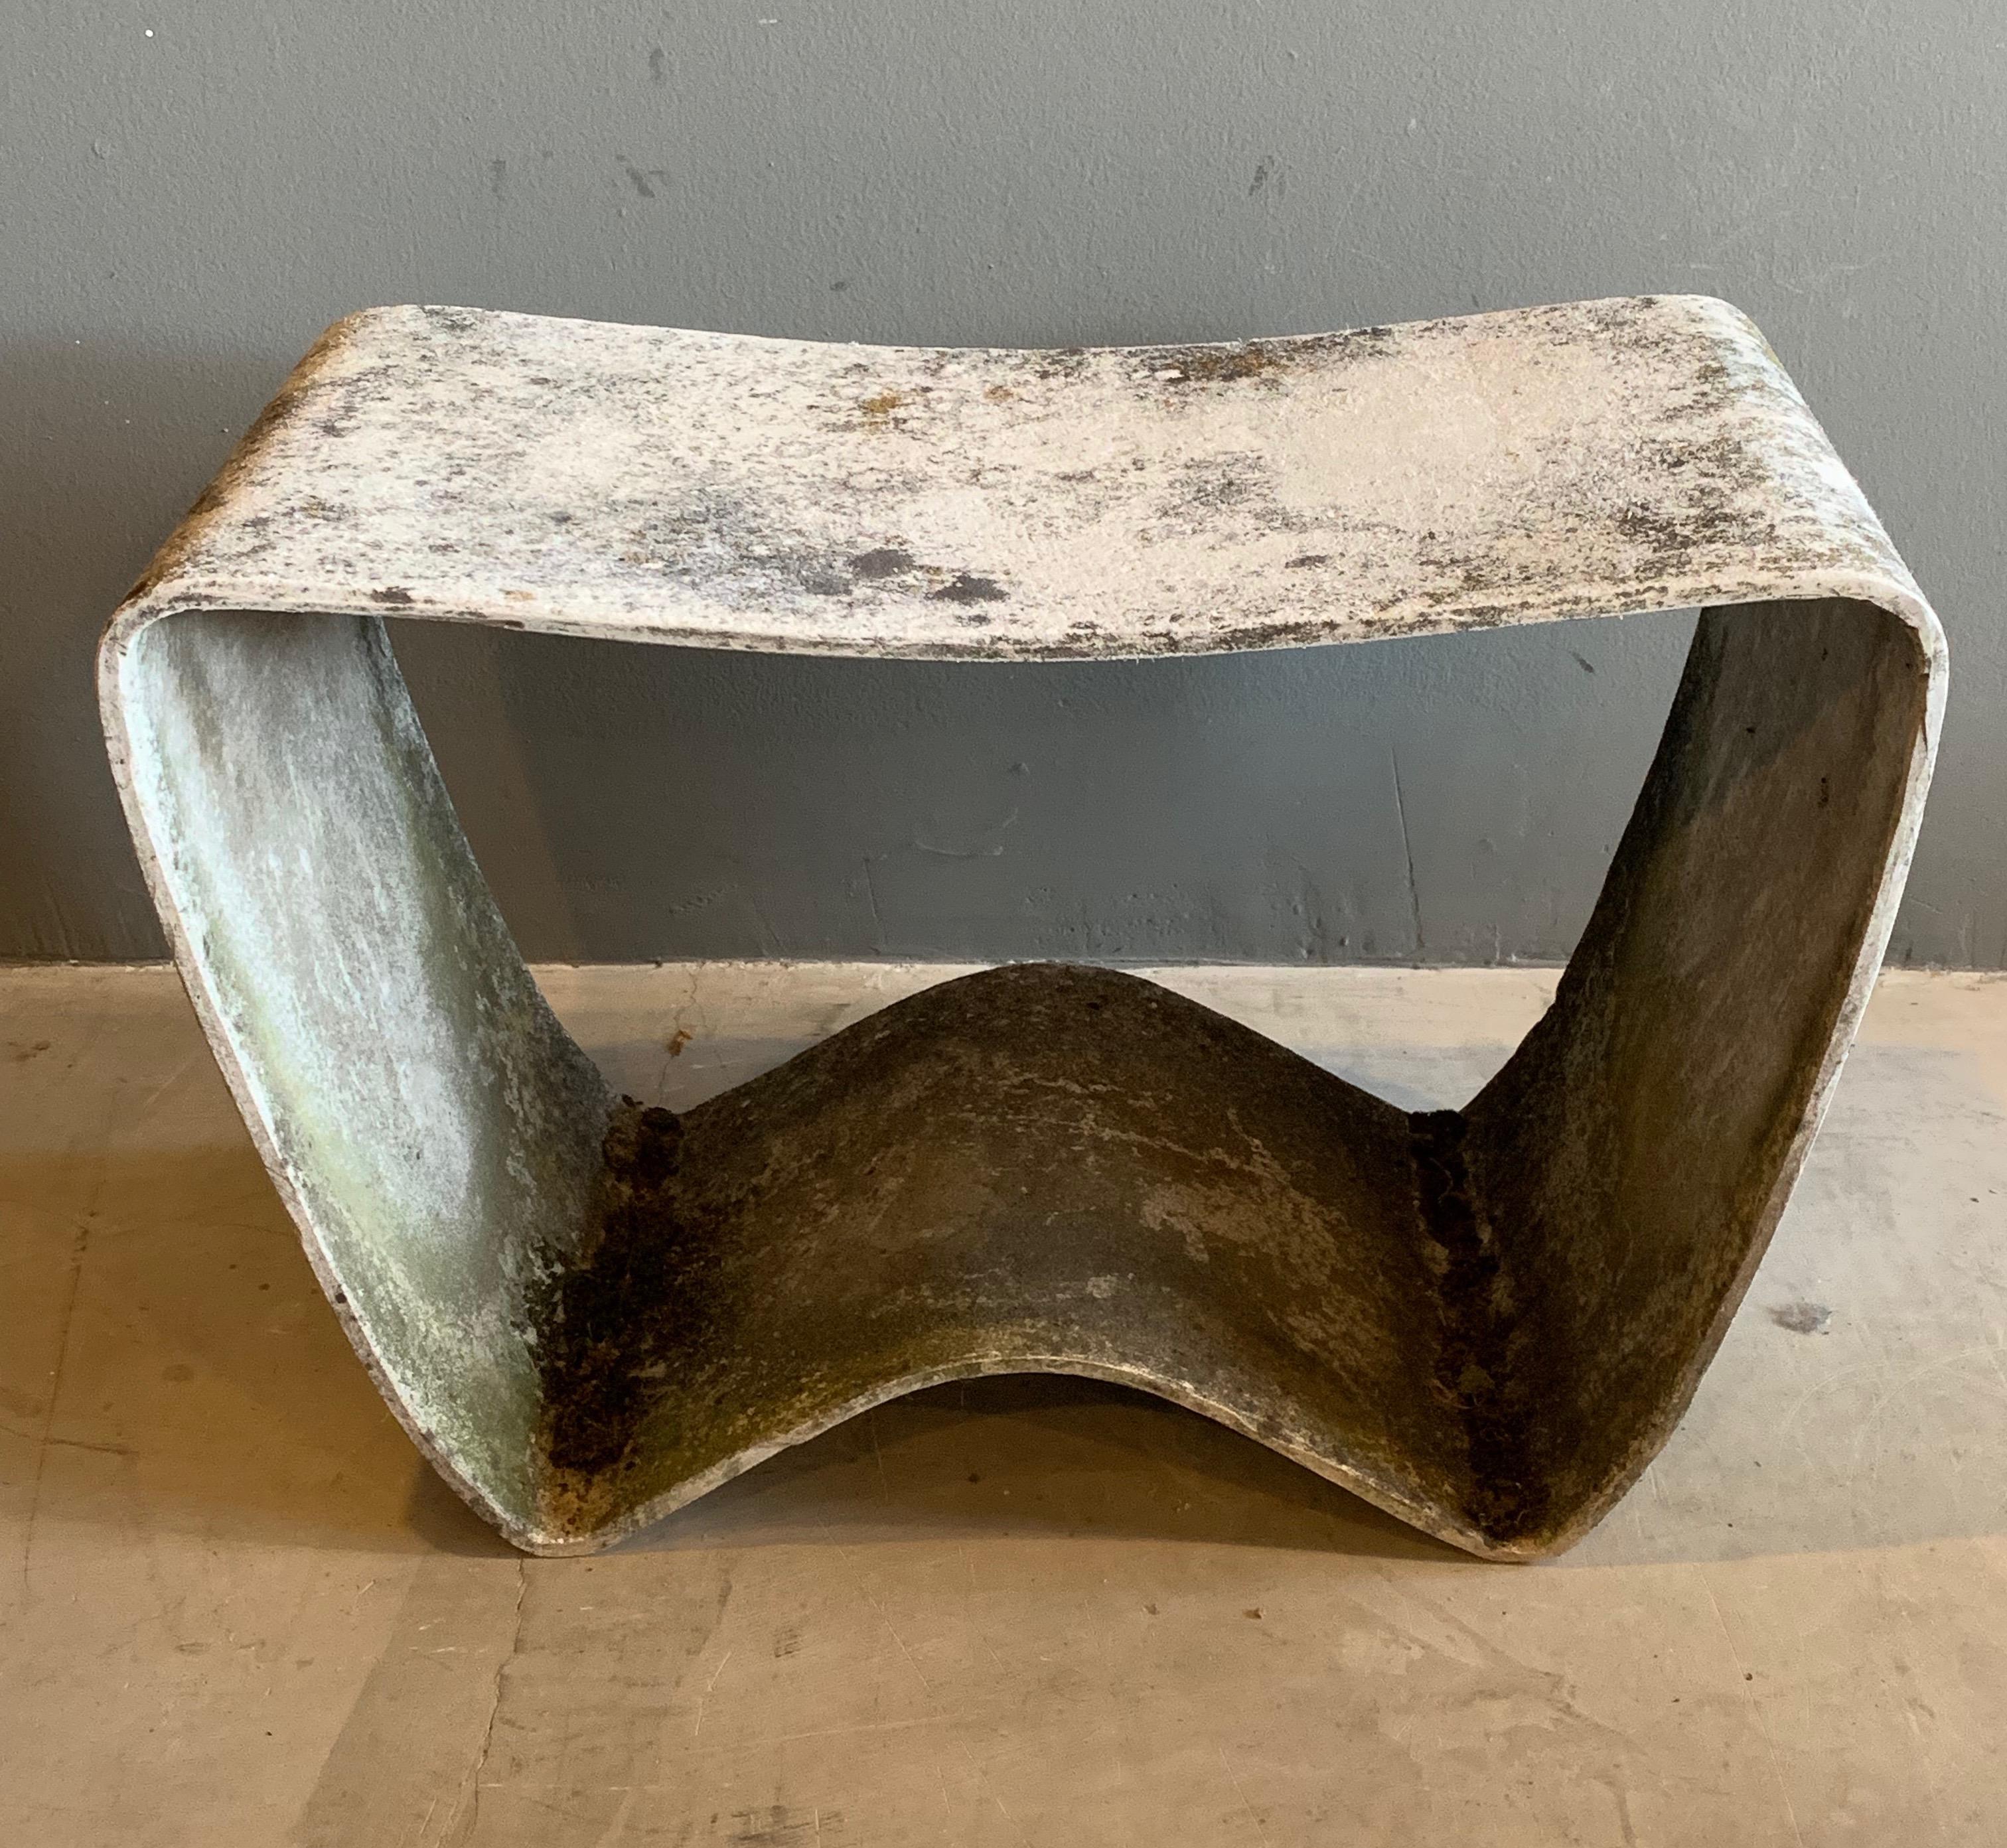 Rare concrete stool by Ludwig Walter for Eternit. Sometimes attributed to Willy Guhl. Same timeframe and factory, different designer. Seldom seen for sale. Great patina. Perfect outdoor seating or side table. Architectural lines, would also look